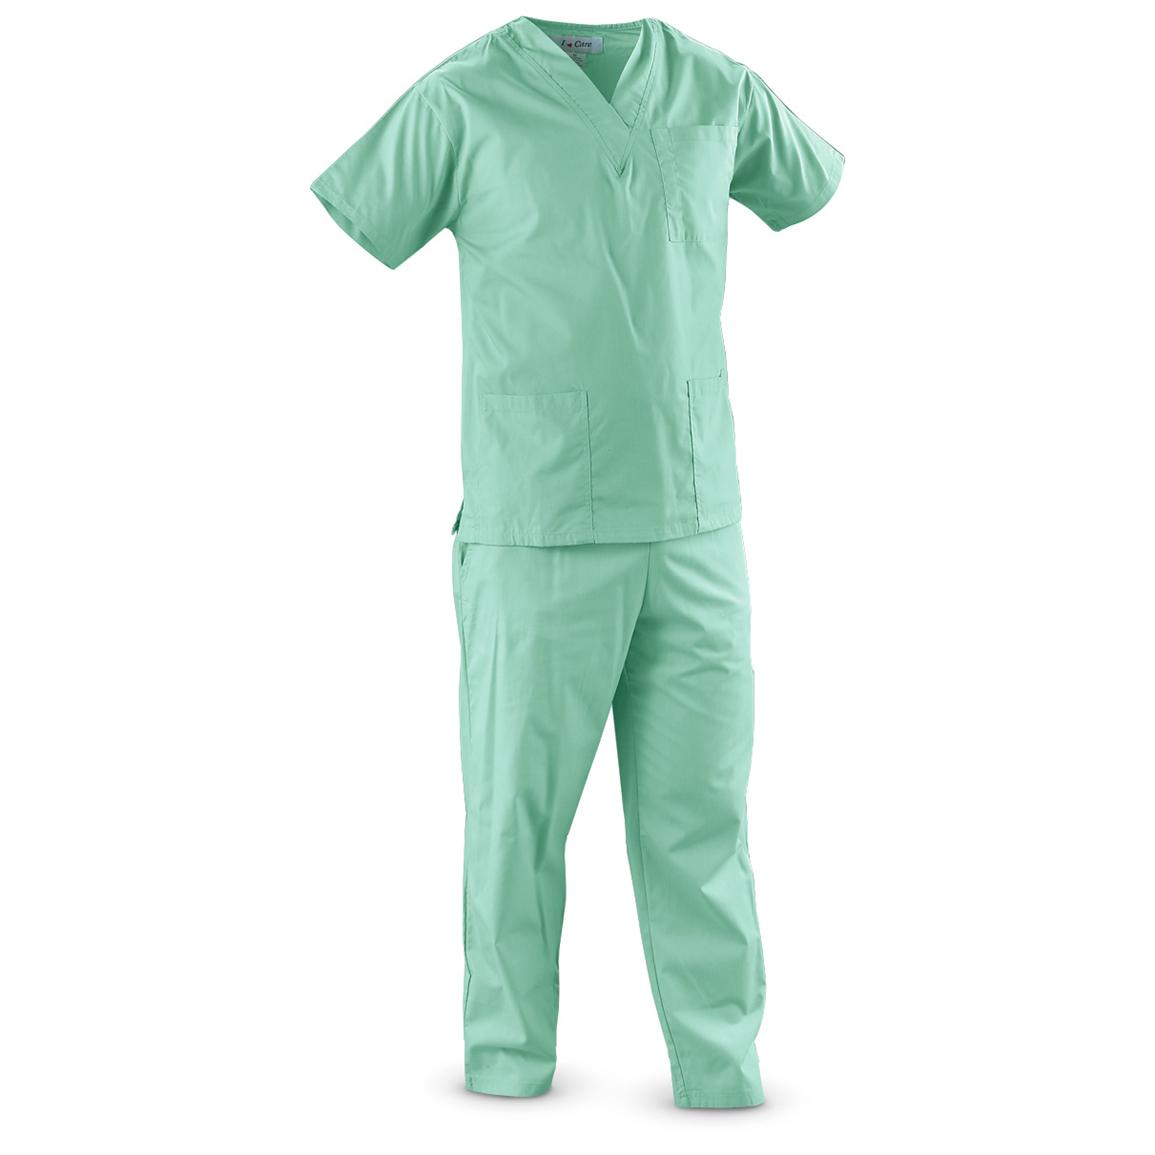 3 Unisex Medical Scrub Tops - 153271, Shirts & Polos at Sportsman's Guide